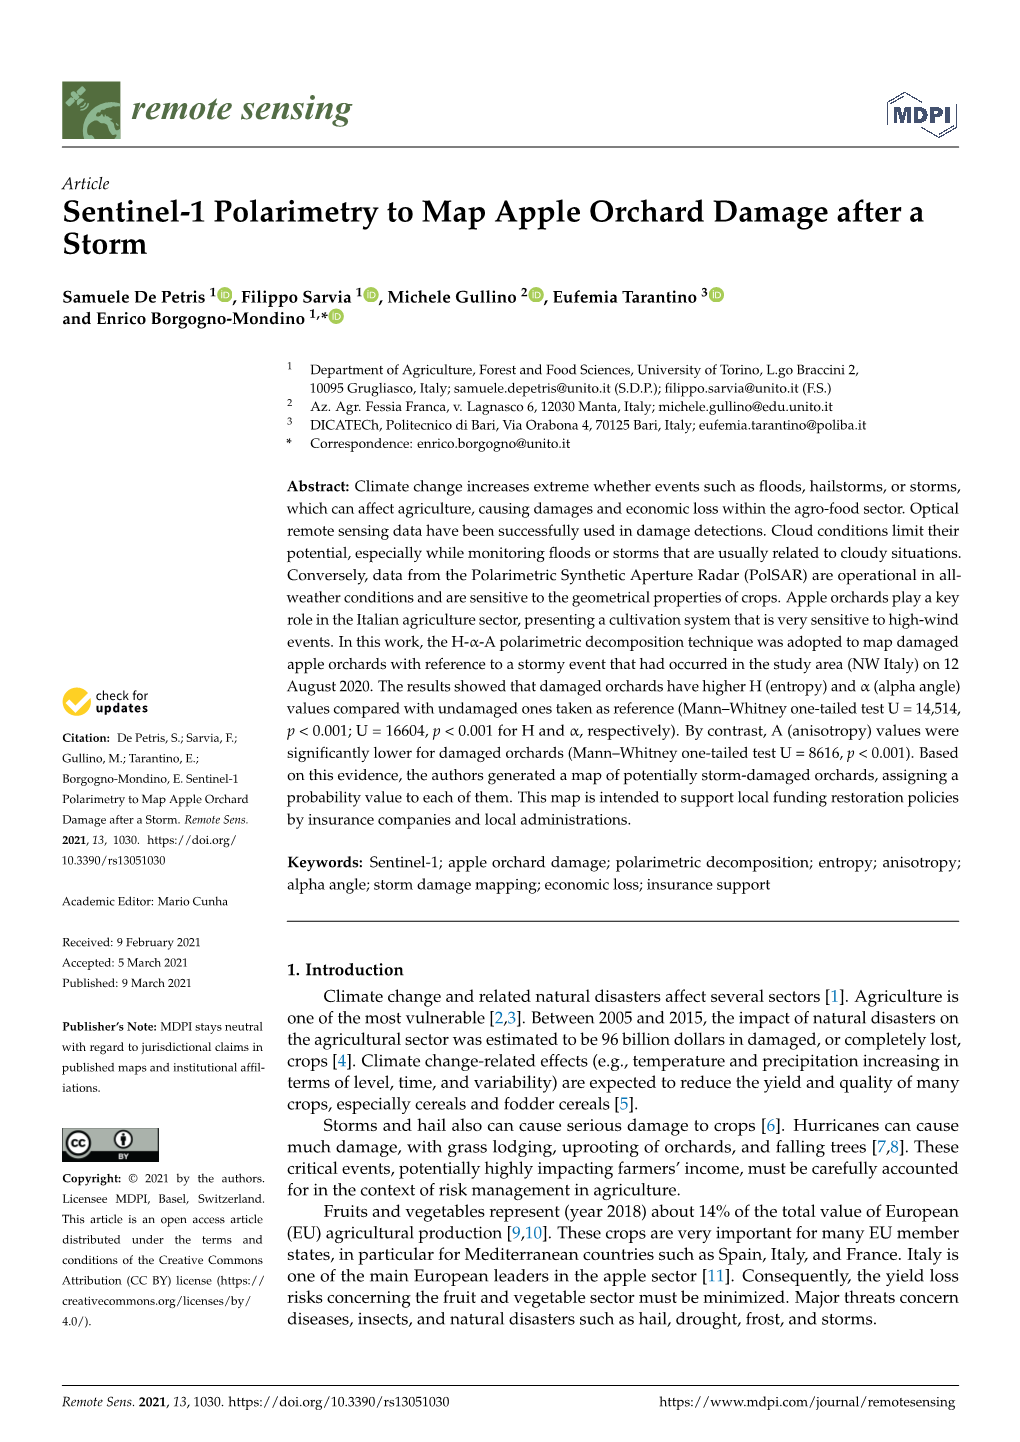 Sentinel-1 Polarimetry to Map Apple Orchard Damage After a Storm